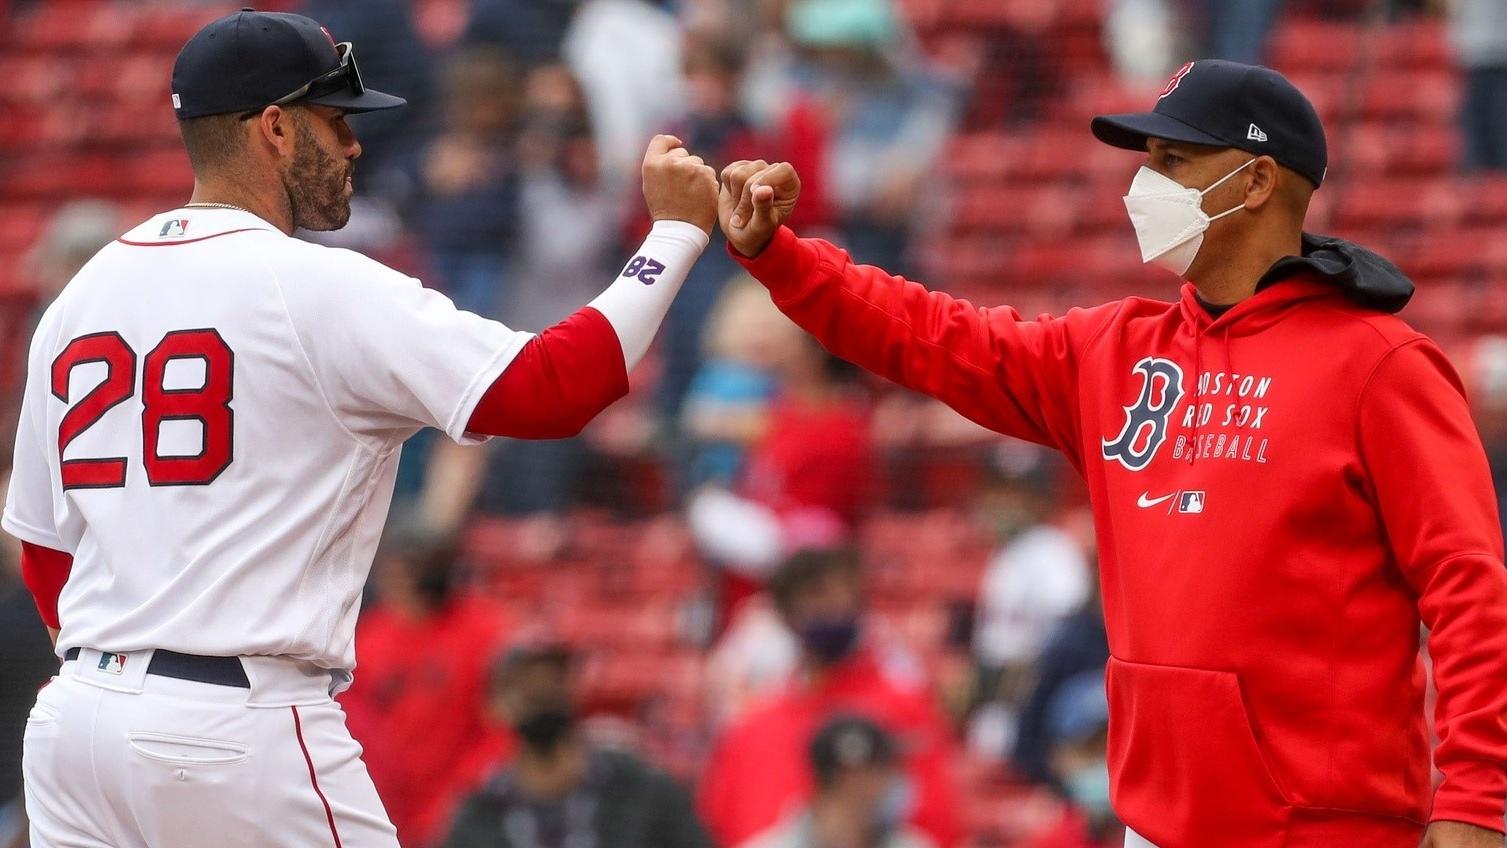 Apr 7, 2021; Boston, Massachusetts, USA; Boston Red Sox Manager Alex Cora (13) and designated hitter J.D. Martinez (28) high five after a win over the Tampa Bay Rays at Fenway Park. / Paul Rutherford-USA TODAY Sports